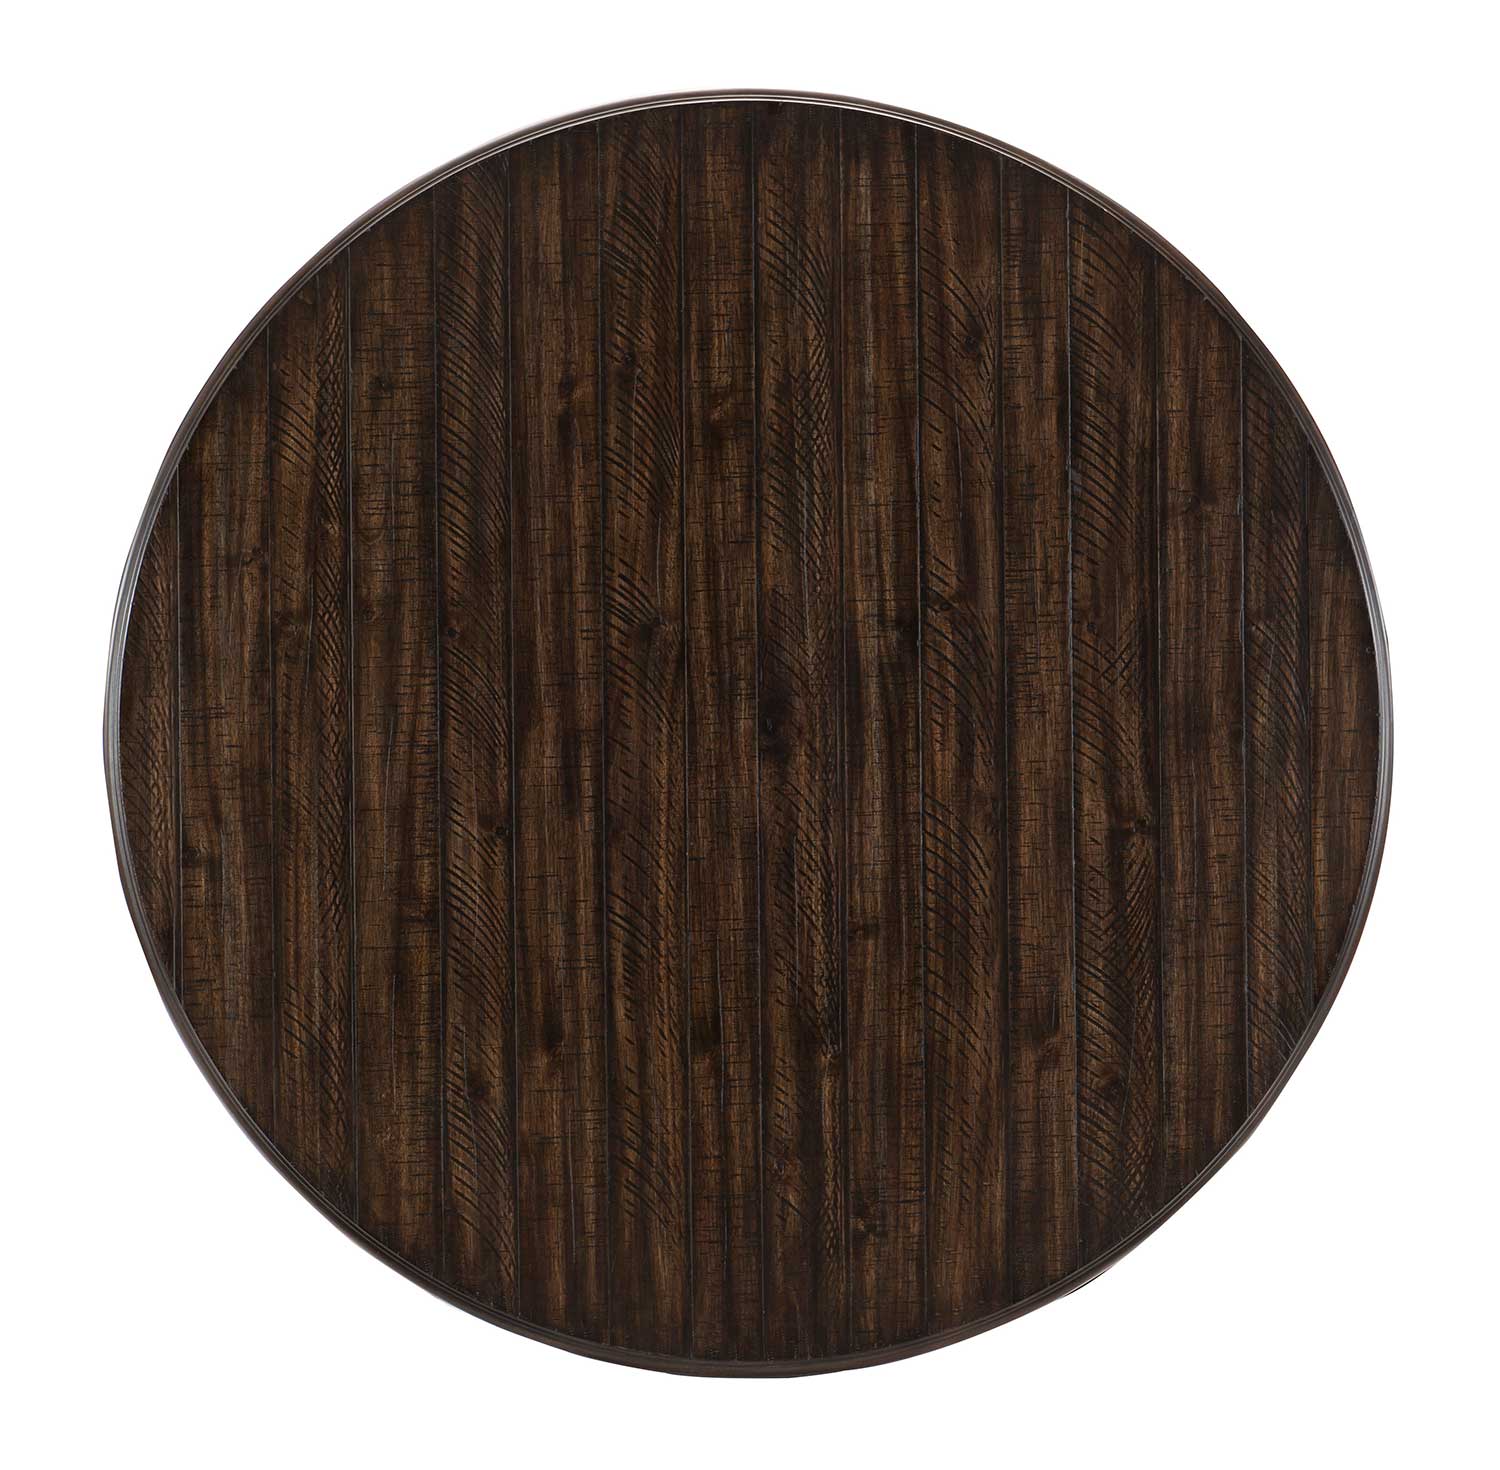 Homelegance Cardano Round Dining Table - Driftwood Charcoal